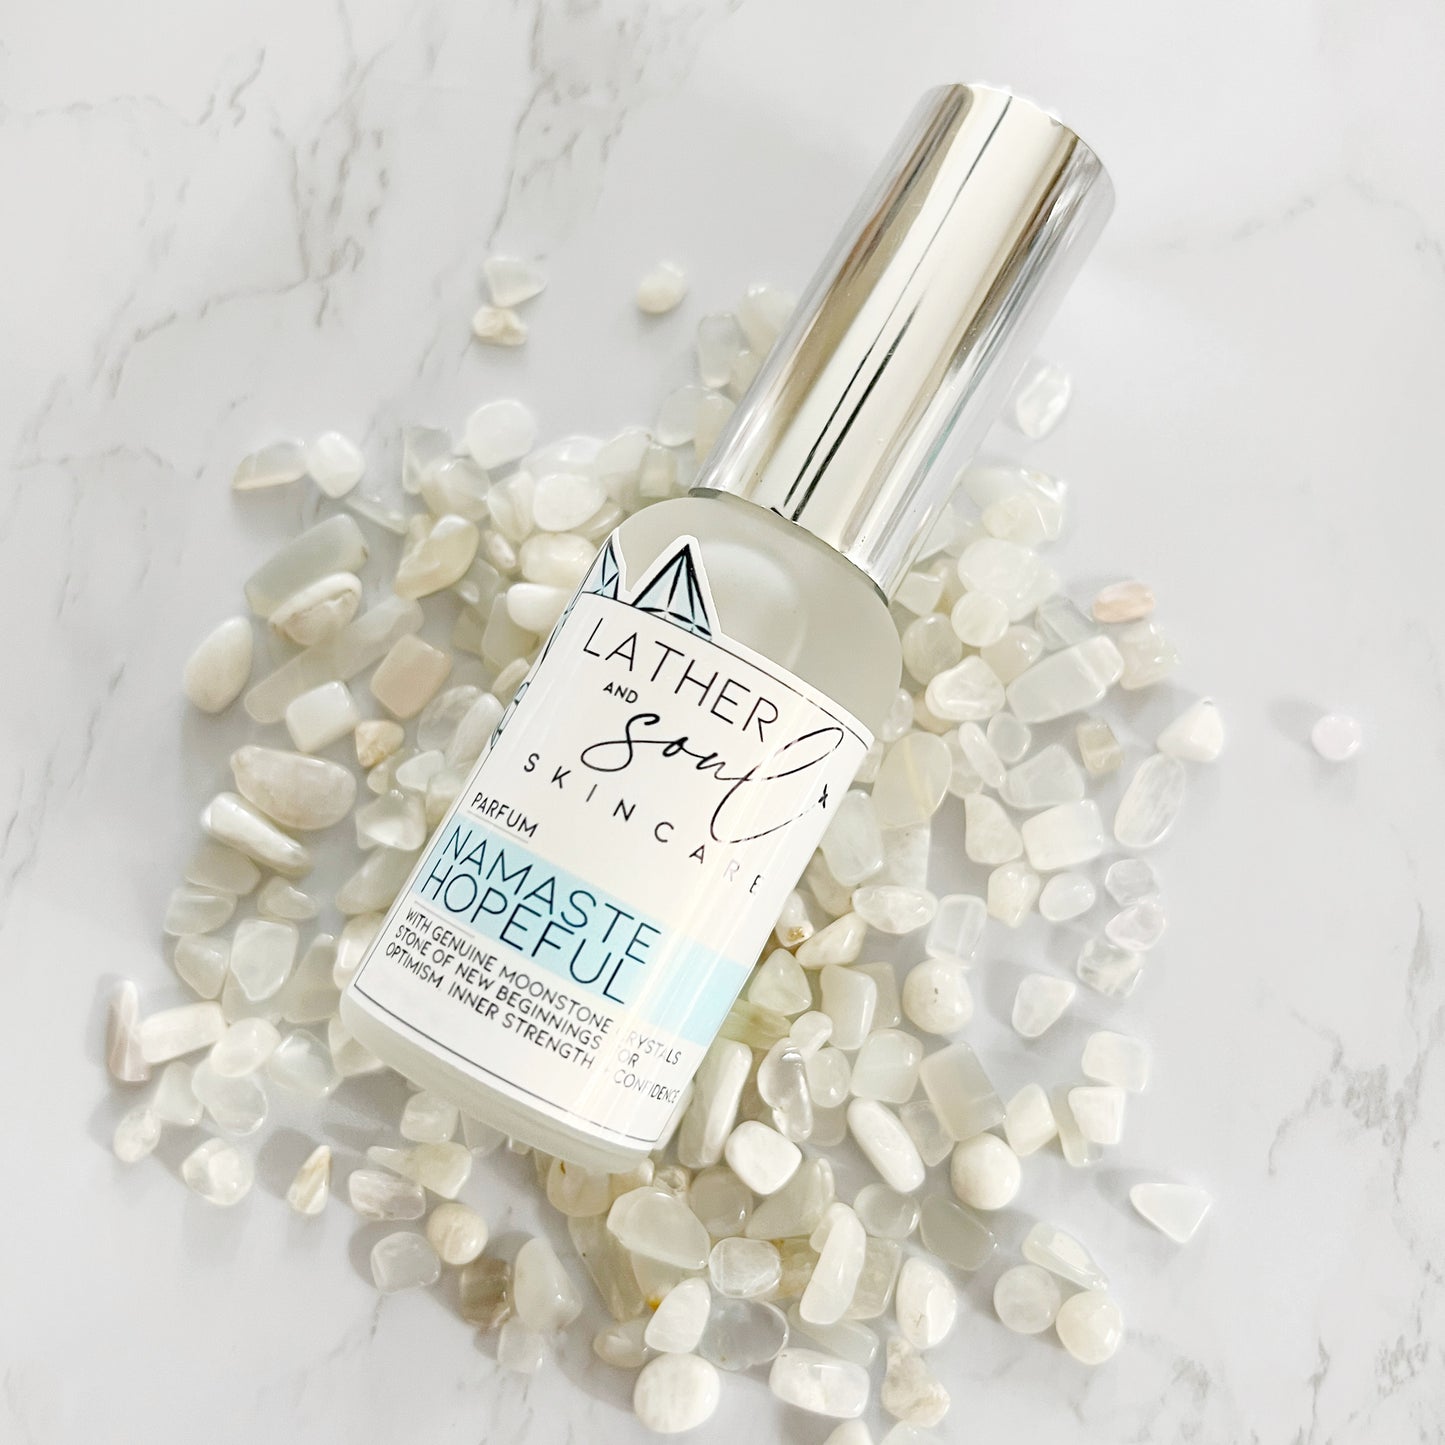 Luxury parfum from Lather and Soul, infused with genuine moonstone crystals.